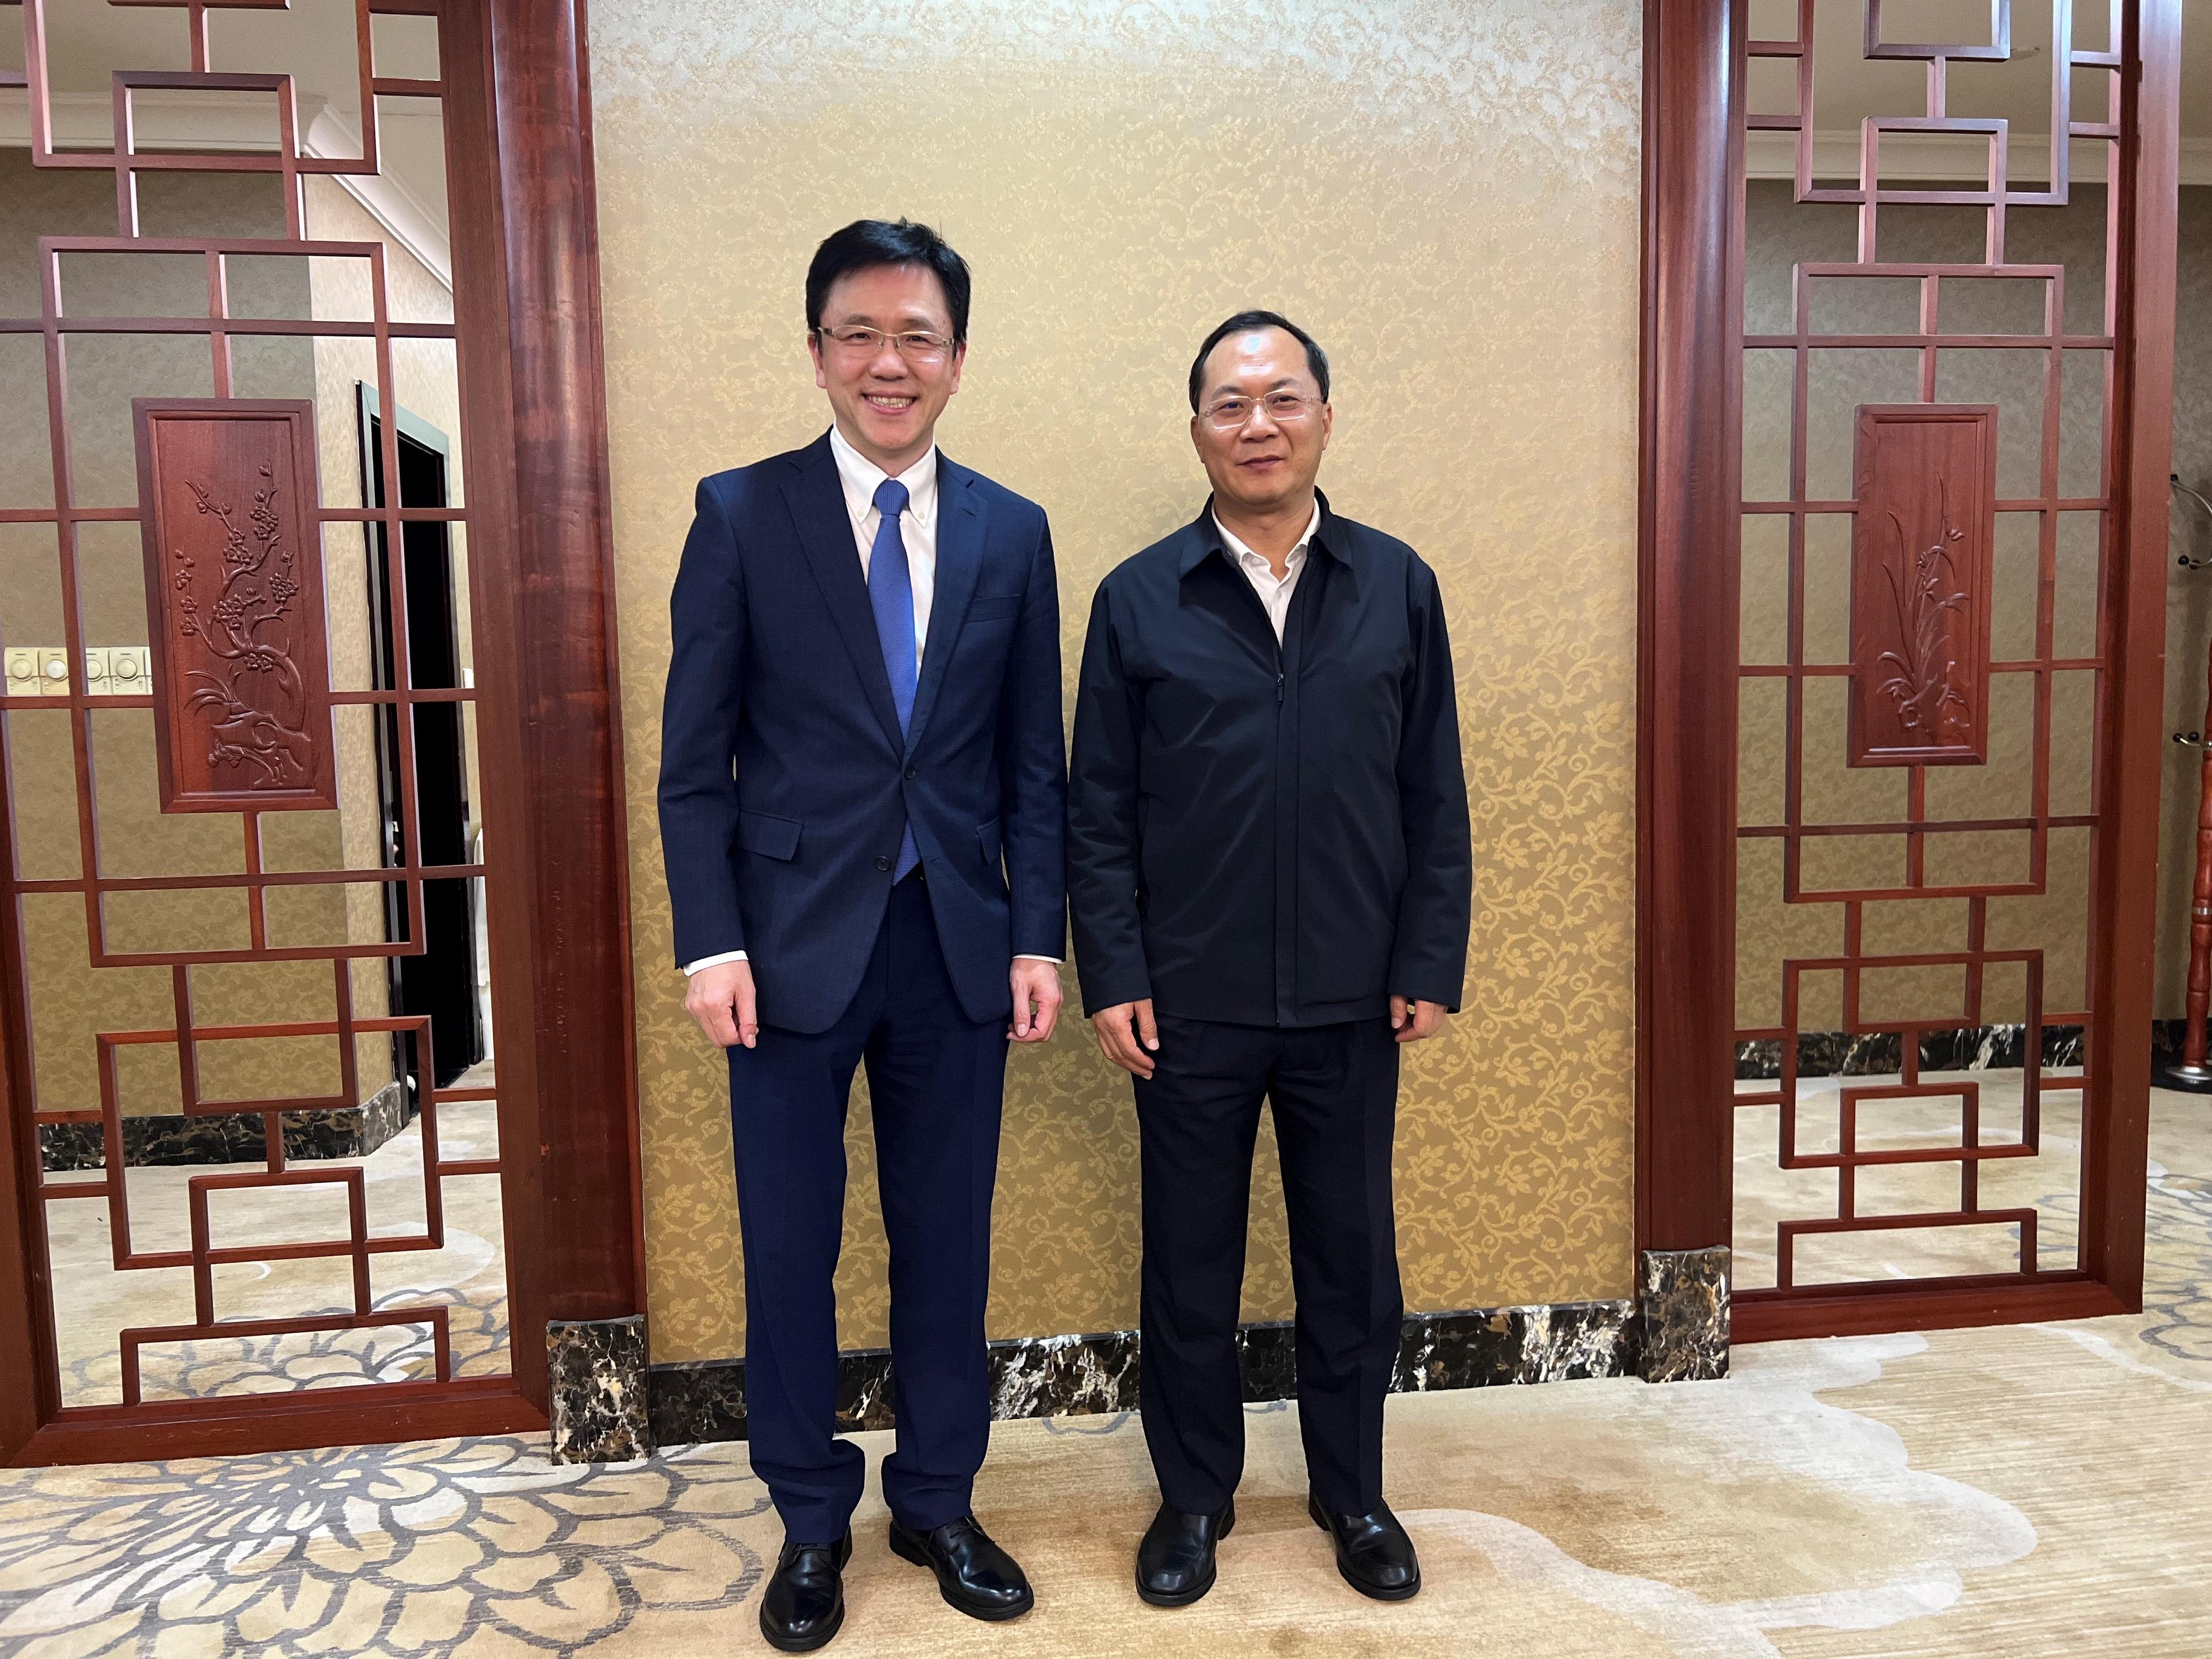 The Secretary for Innovation, Technology and Industry, Professor Sun Dong (left), met with the Secretary of the CPC Guangzhou Nansha District Committee, Mr Lu Yixian (right), yesterday afternoon (March 30) to exchange views on promoting innovation and technology linkage between Hong Kong and Guangzhou.